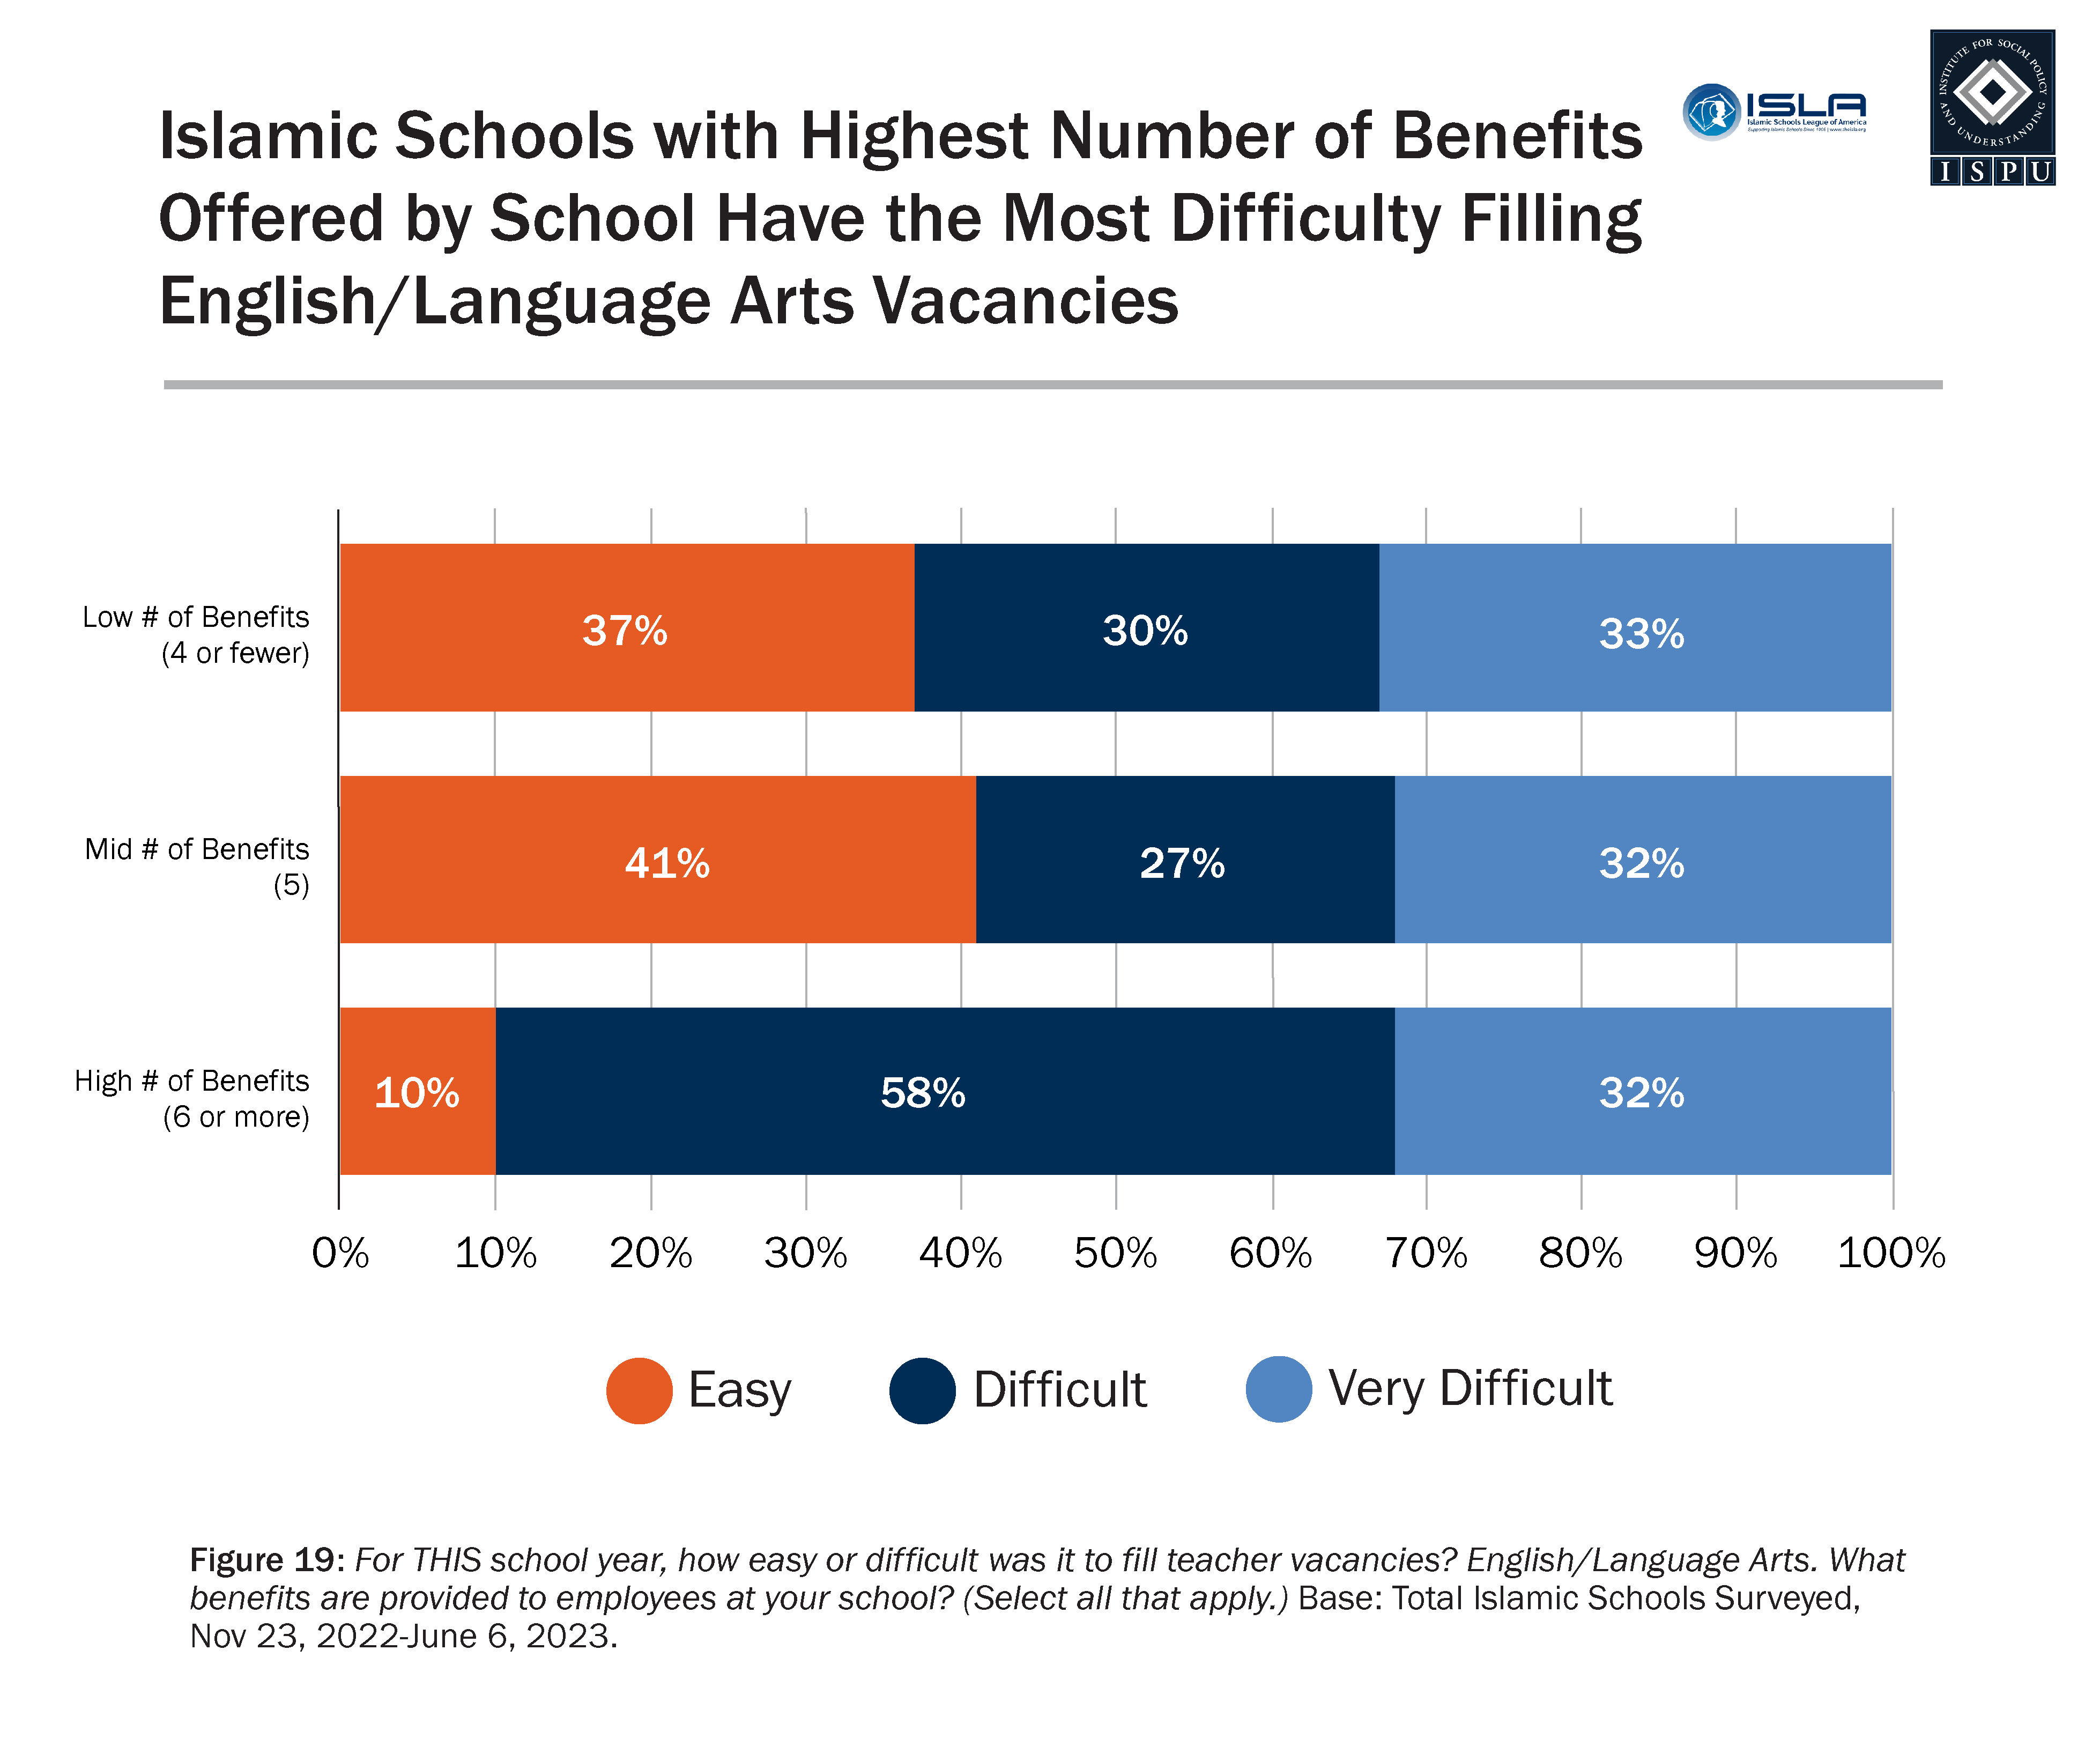 A horizontal stacked bar chart showing the percentage of schools filling English/Language Arts teacher vacancies at each level of ease/difficulty (Easy, Difficult, Very Difficult) by the number of available benefits (low, mid-range, high).